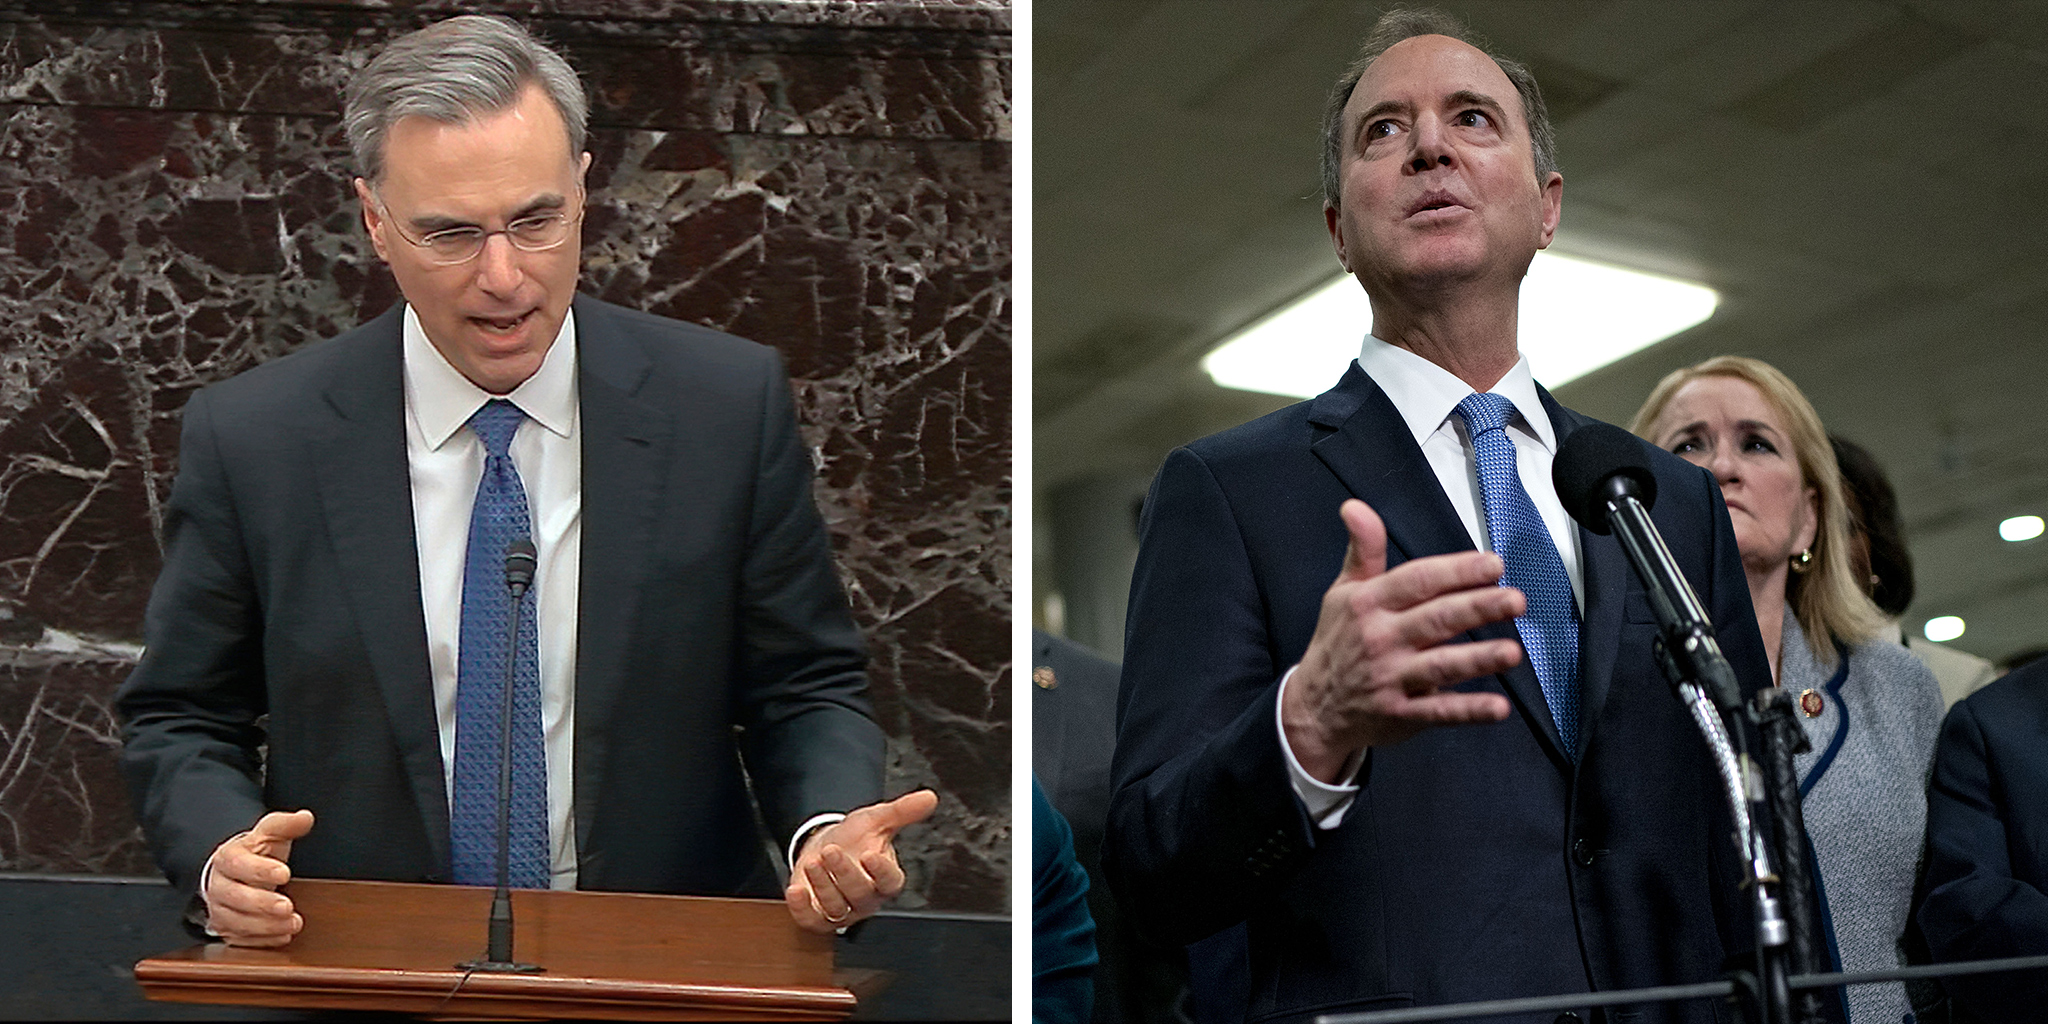 White House counsel Pat Cipollone and Representative Adam Schiff (Senate Television—AP; Andrew Harrer—Bloomberg/Getty Images)